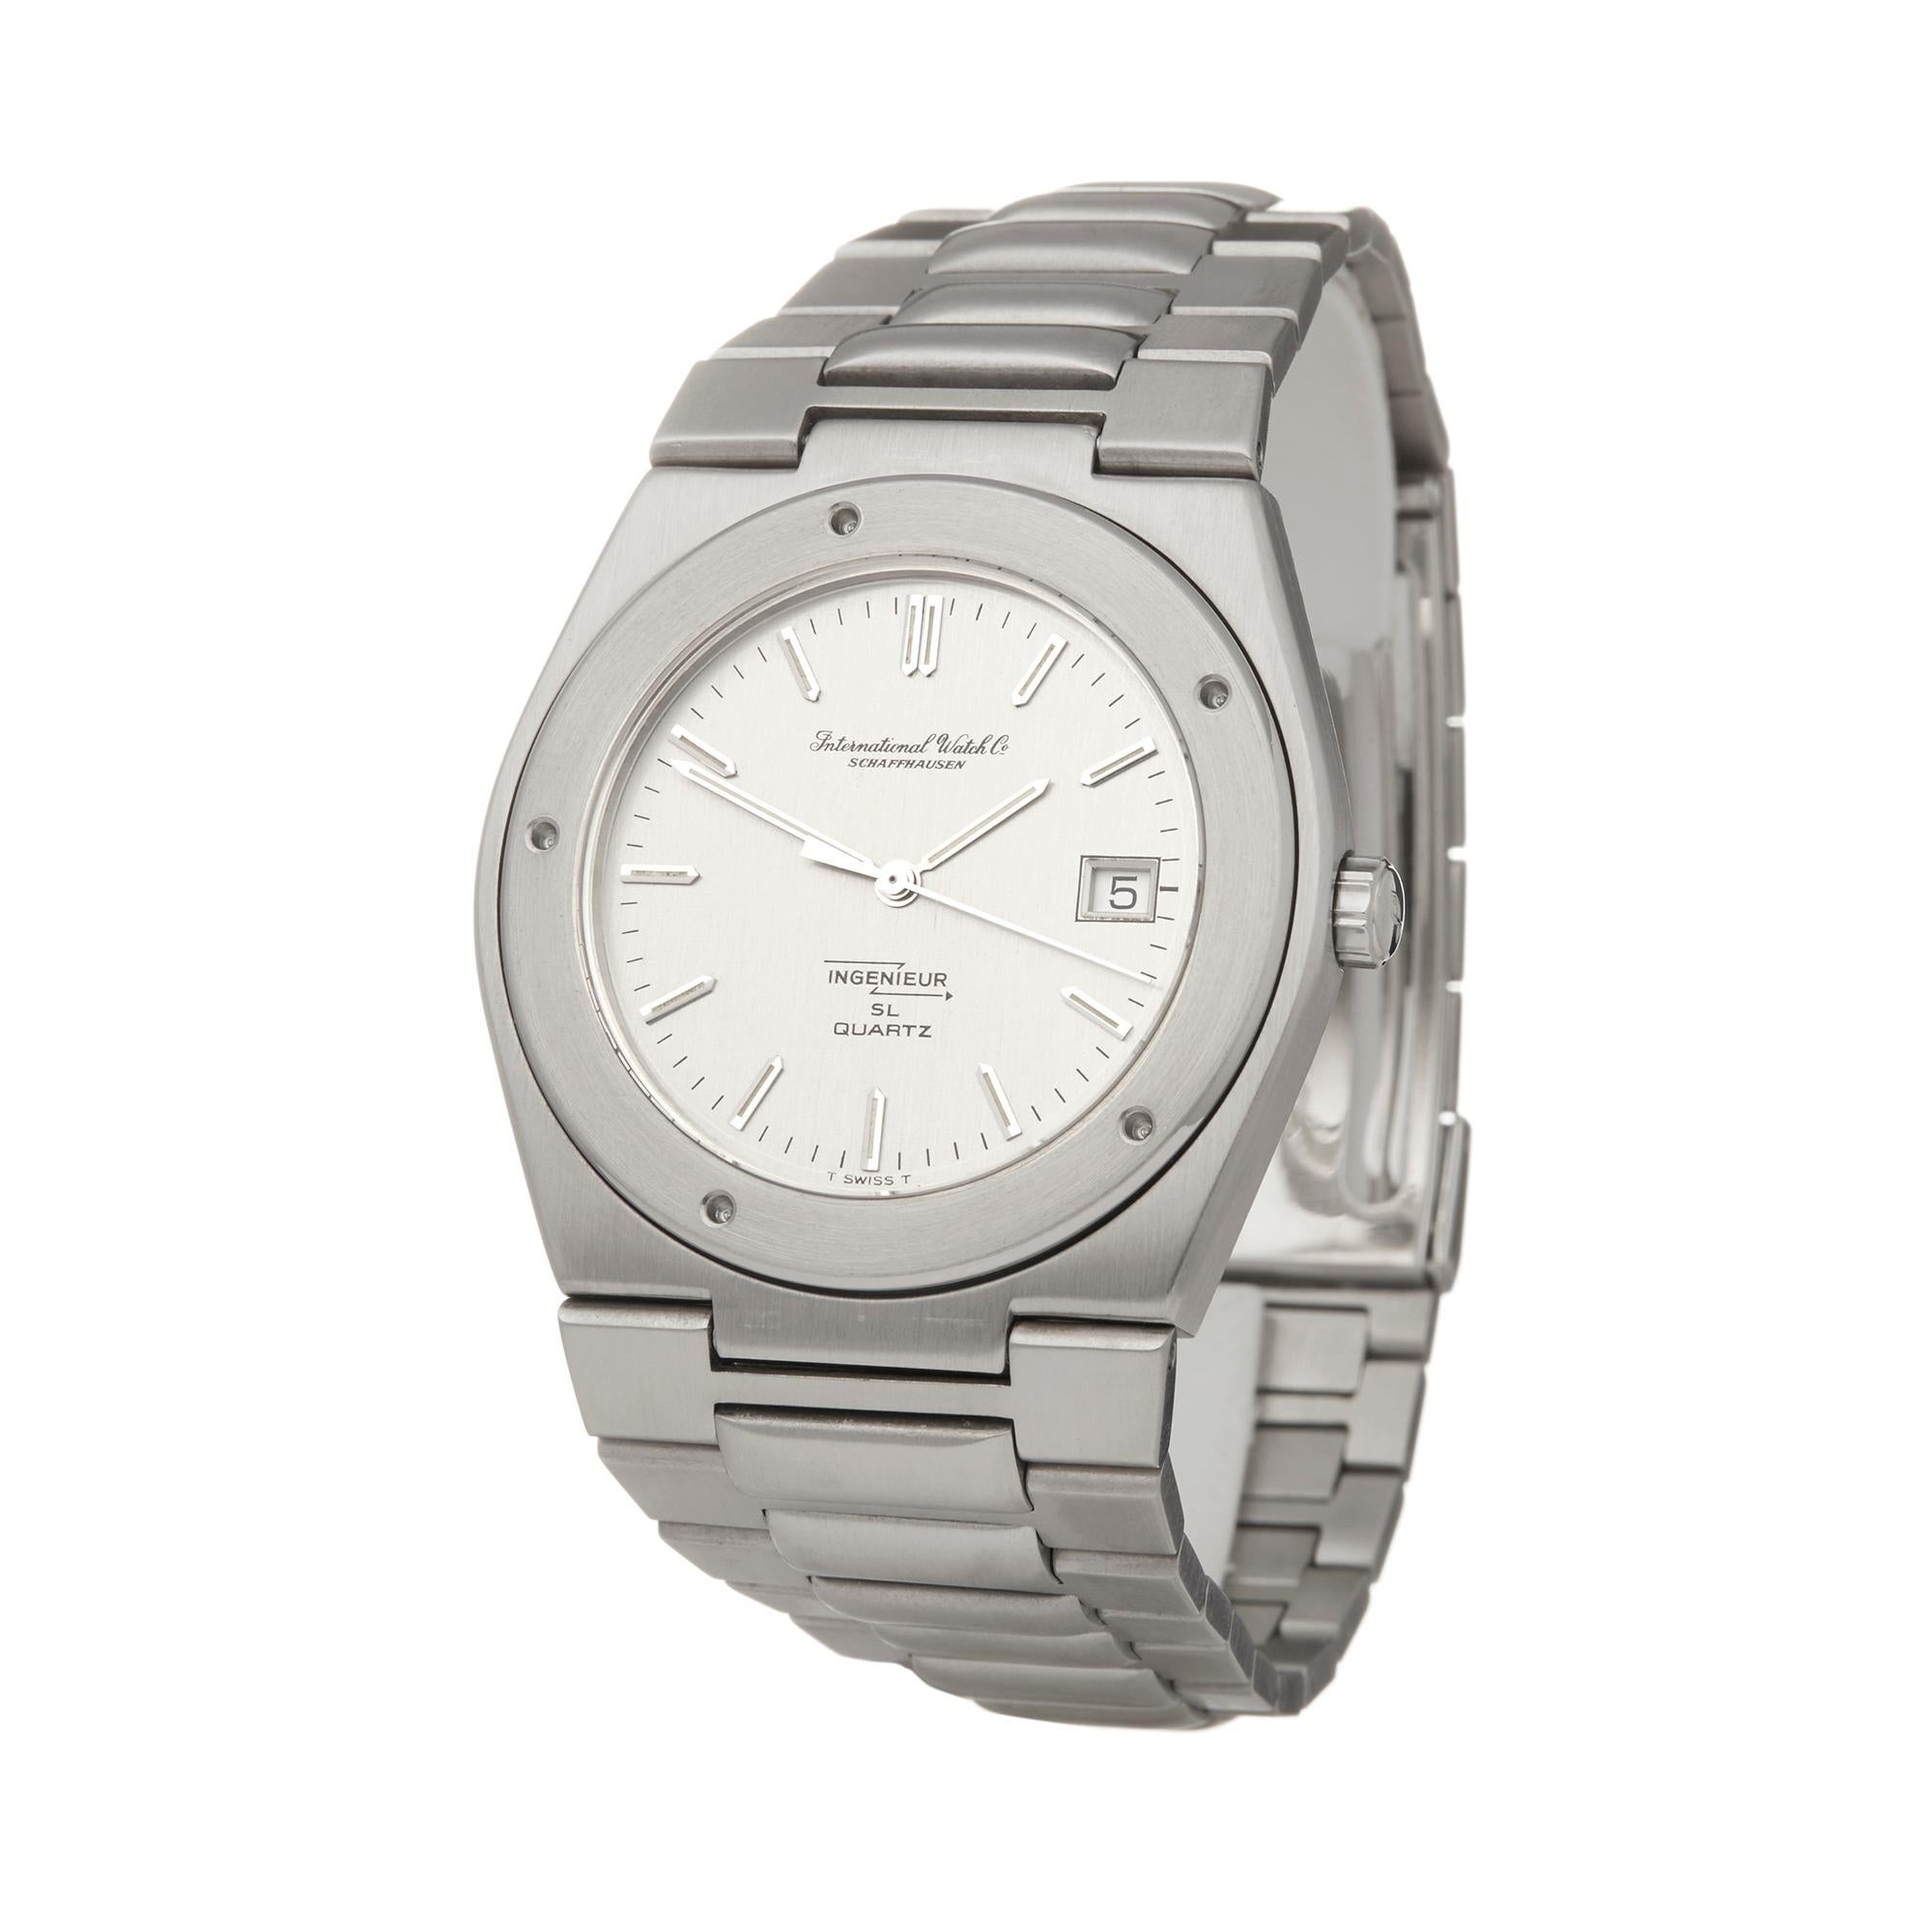 Ref: W5884
Manufacturer: IWC
Model: Ingenieur
Model Ref: IW1832
Age: Circa 1980's
Gender: Mens
Complete With: Presentation Box
Dial: Silver roman
Glass: Sapphire Crystal
Movement: Automatic
Water Resistance: Not Recommended for Use in Water
Case: